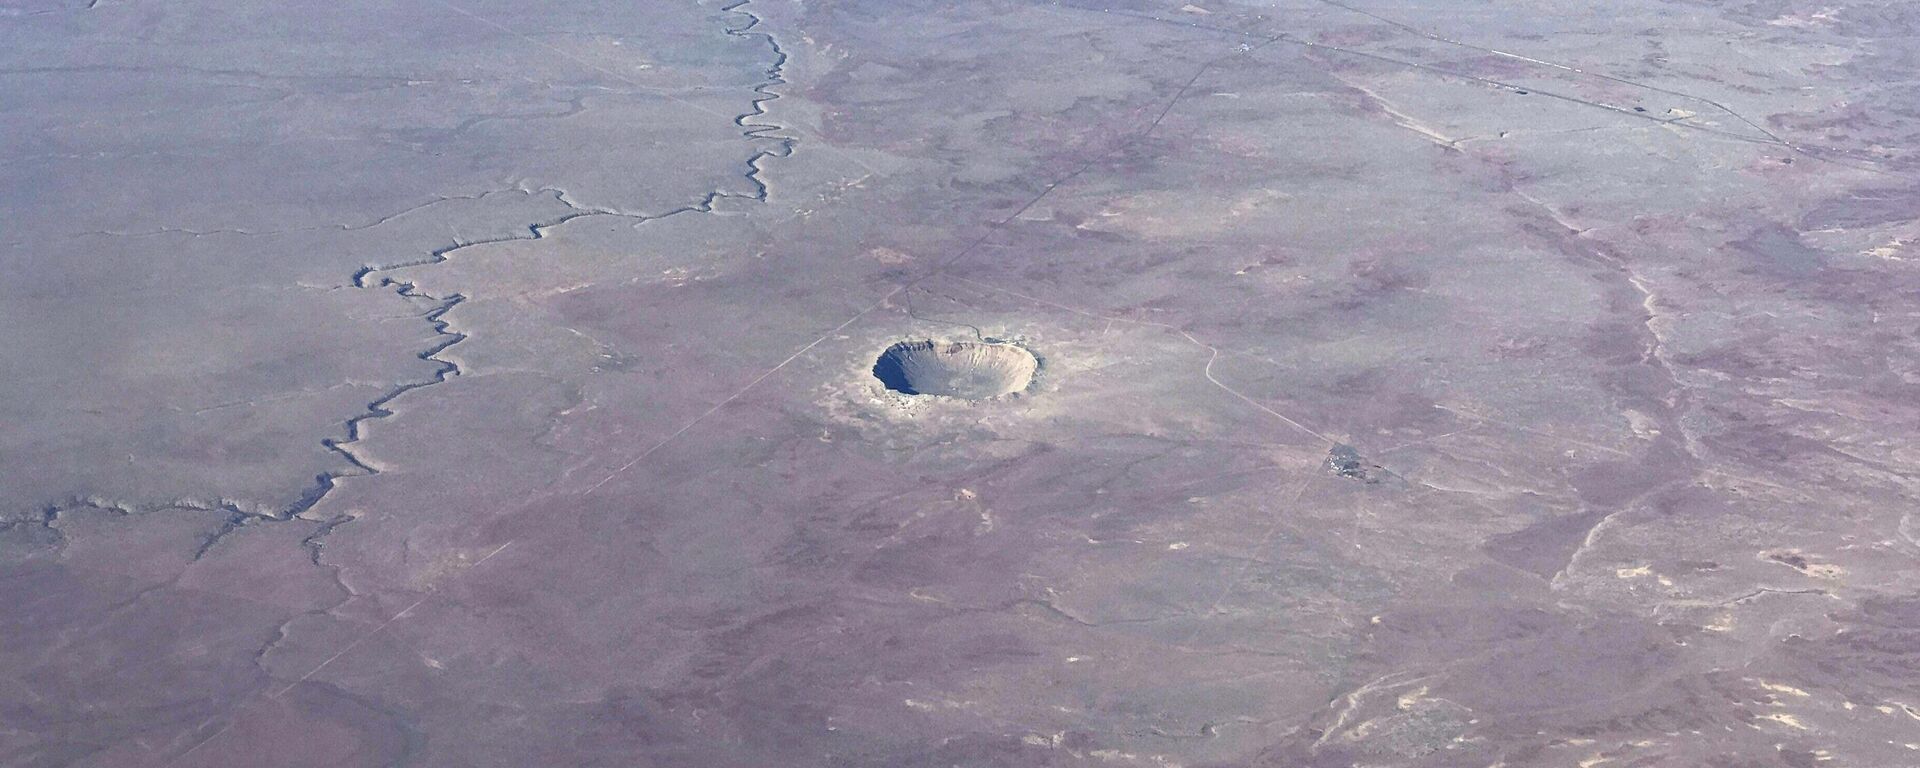 The Meteor Crater near Winslow, Arizona, is seen from a plane Januray 30, 2017. The Meteor Crater, sometimes known as the Barringer Crater and formerly as the Canyon Diablo crater, is a famous impact crater. It is the breath-taking result of a collision between an asteroid traveling 26,000 miles per hour and planet Earth approximately 50,000 years ago. Meteor Crater is nearly one mile across, 2.4 miles in circumference and more than 550 feet deep. - Sputnik India, 1920, 23.10.2023